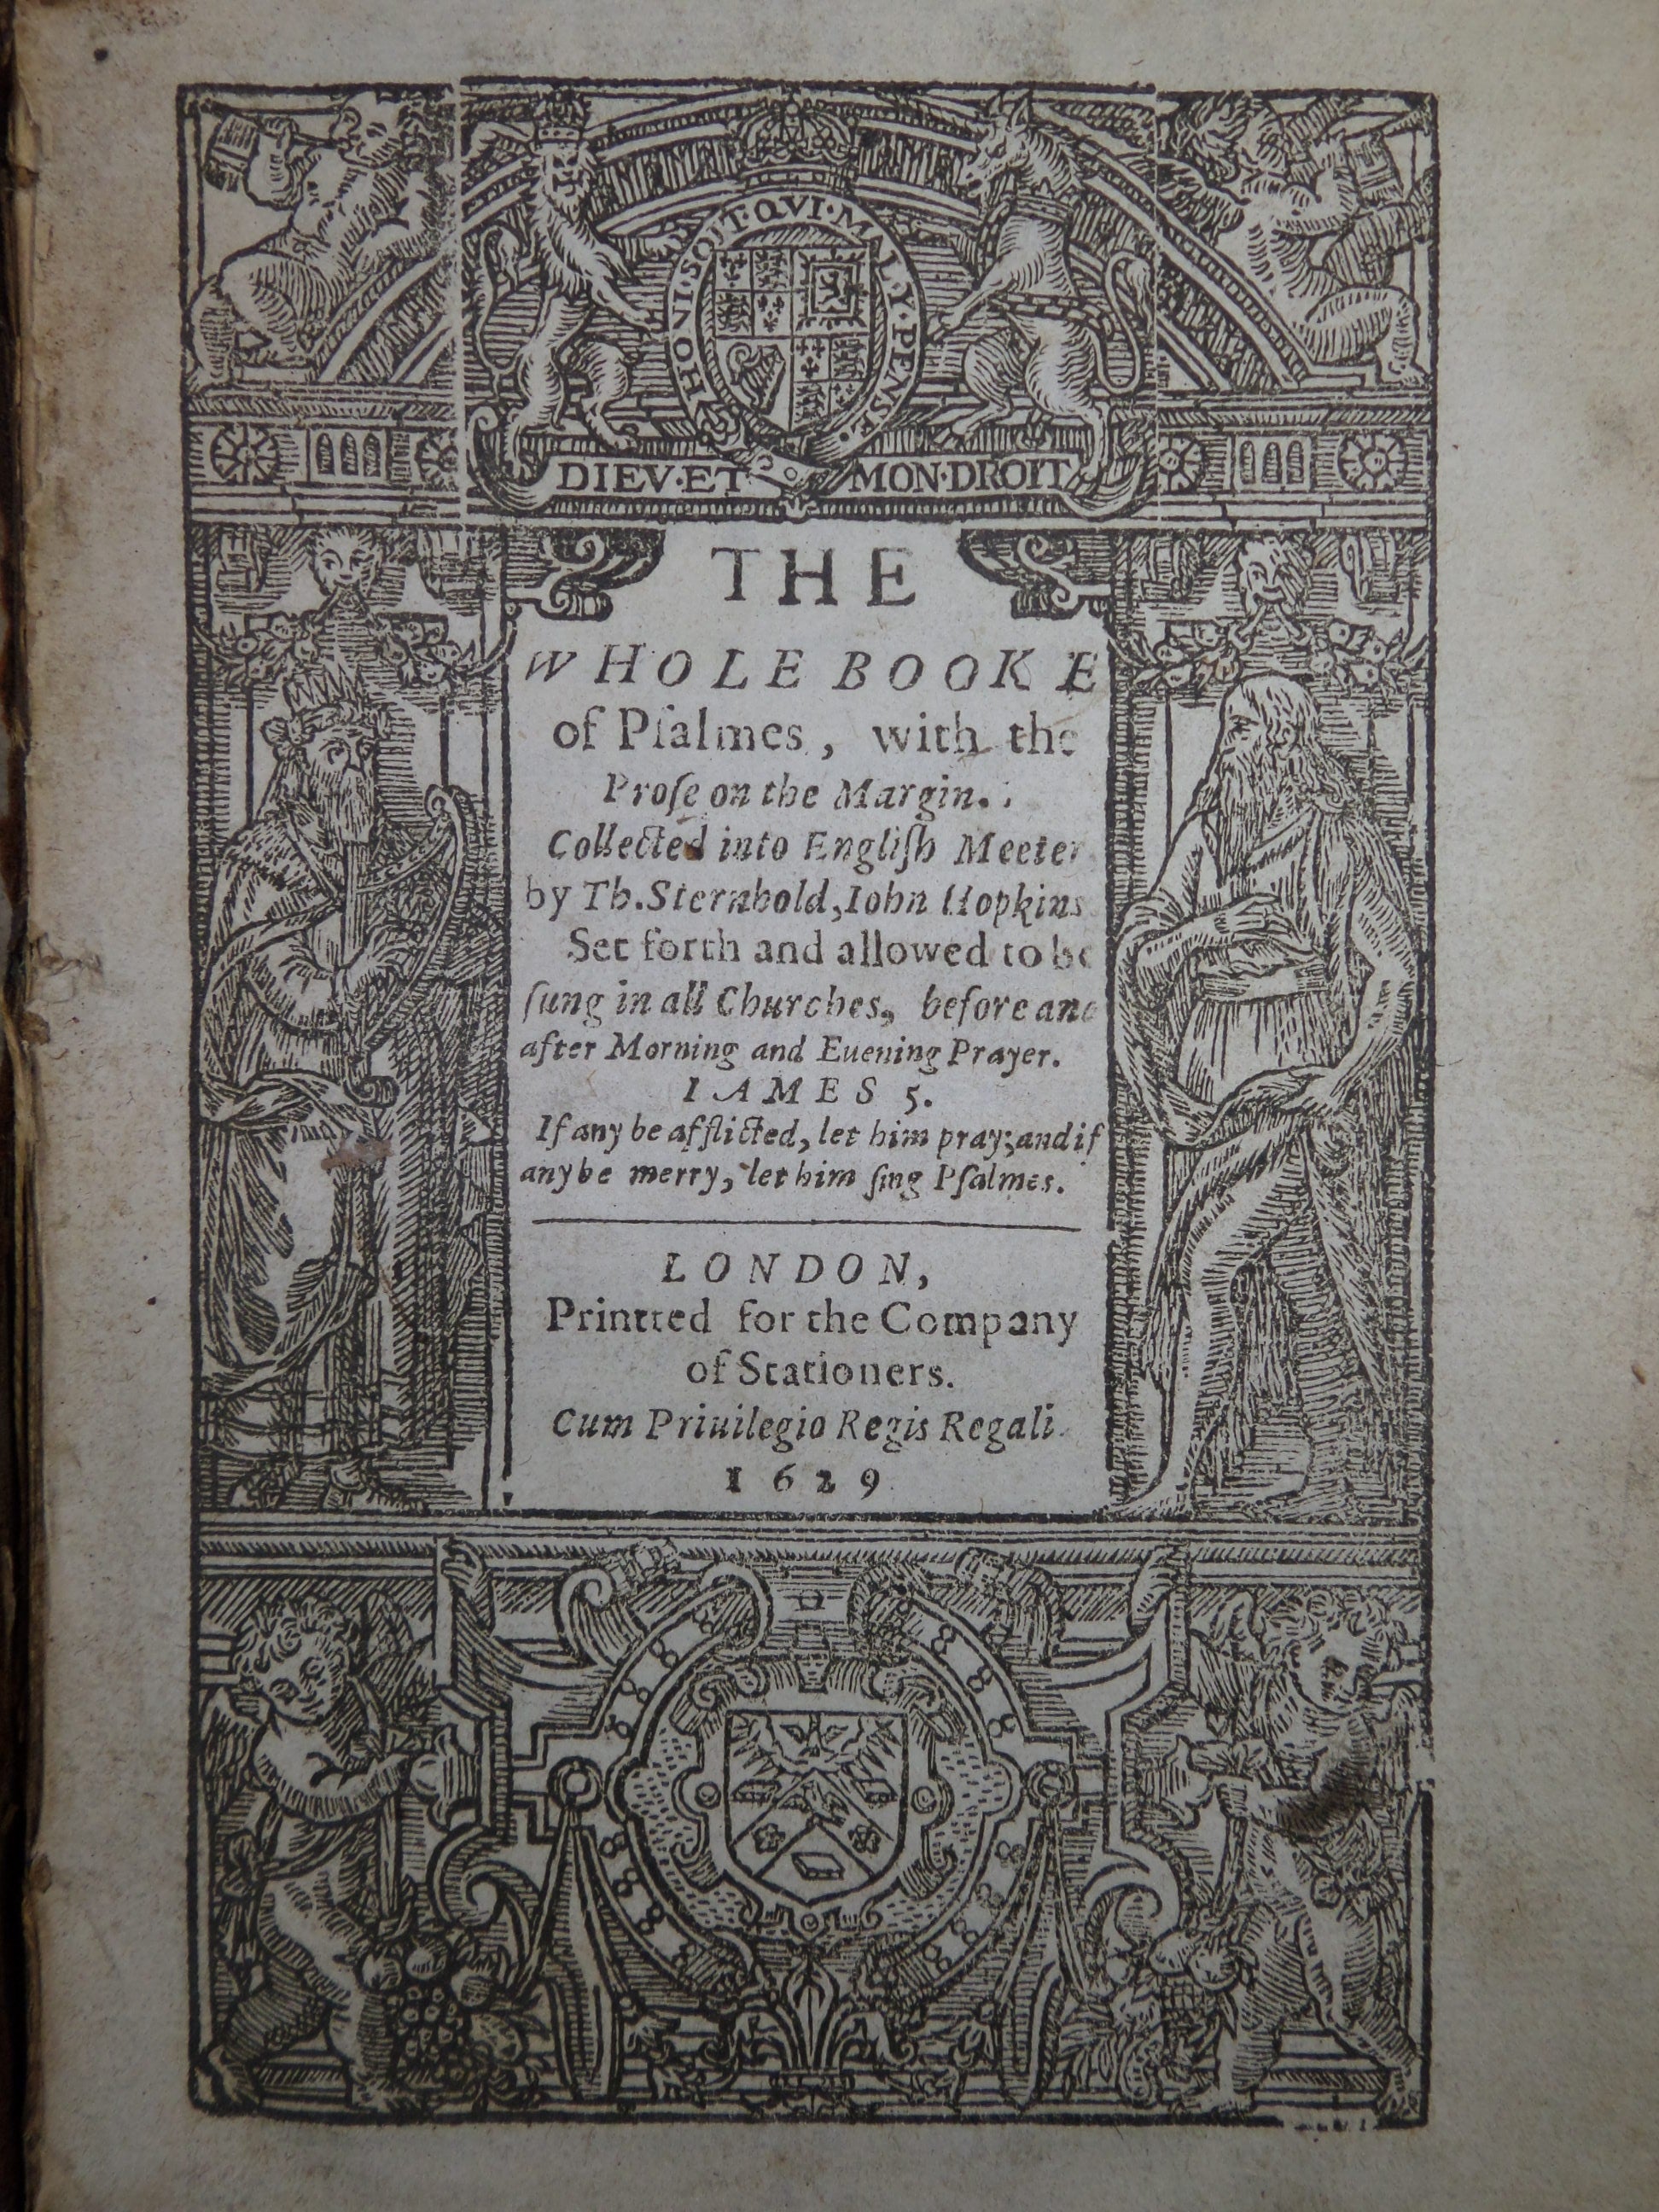 THE WHOLE BOOKE OF PSALMES 1629 FINE LEATHER BINDING - [BOOK OF PSALMS - ENGLISH]